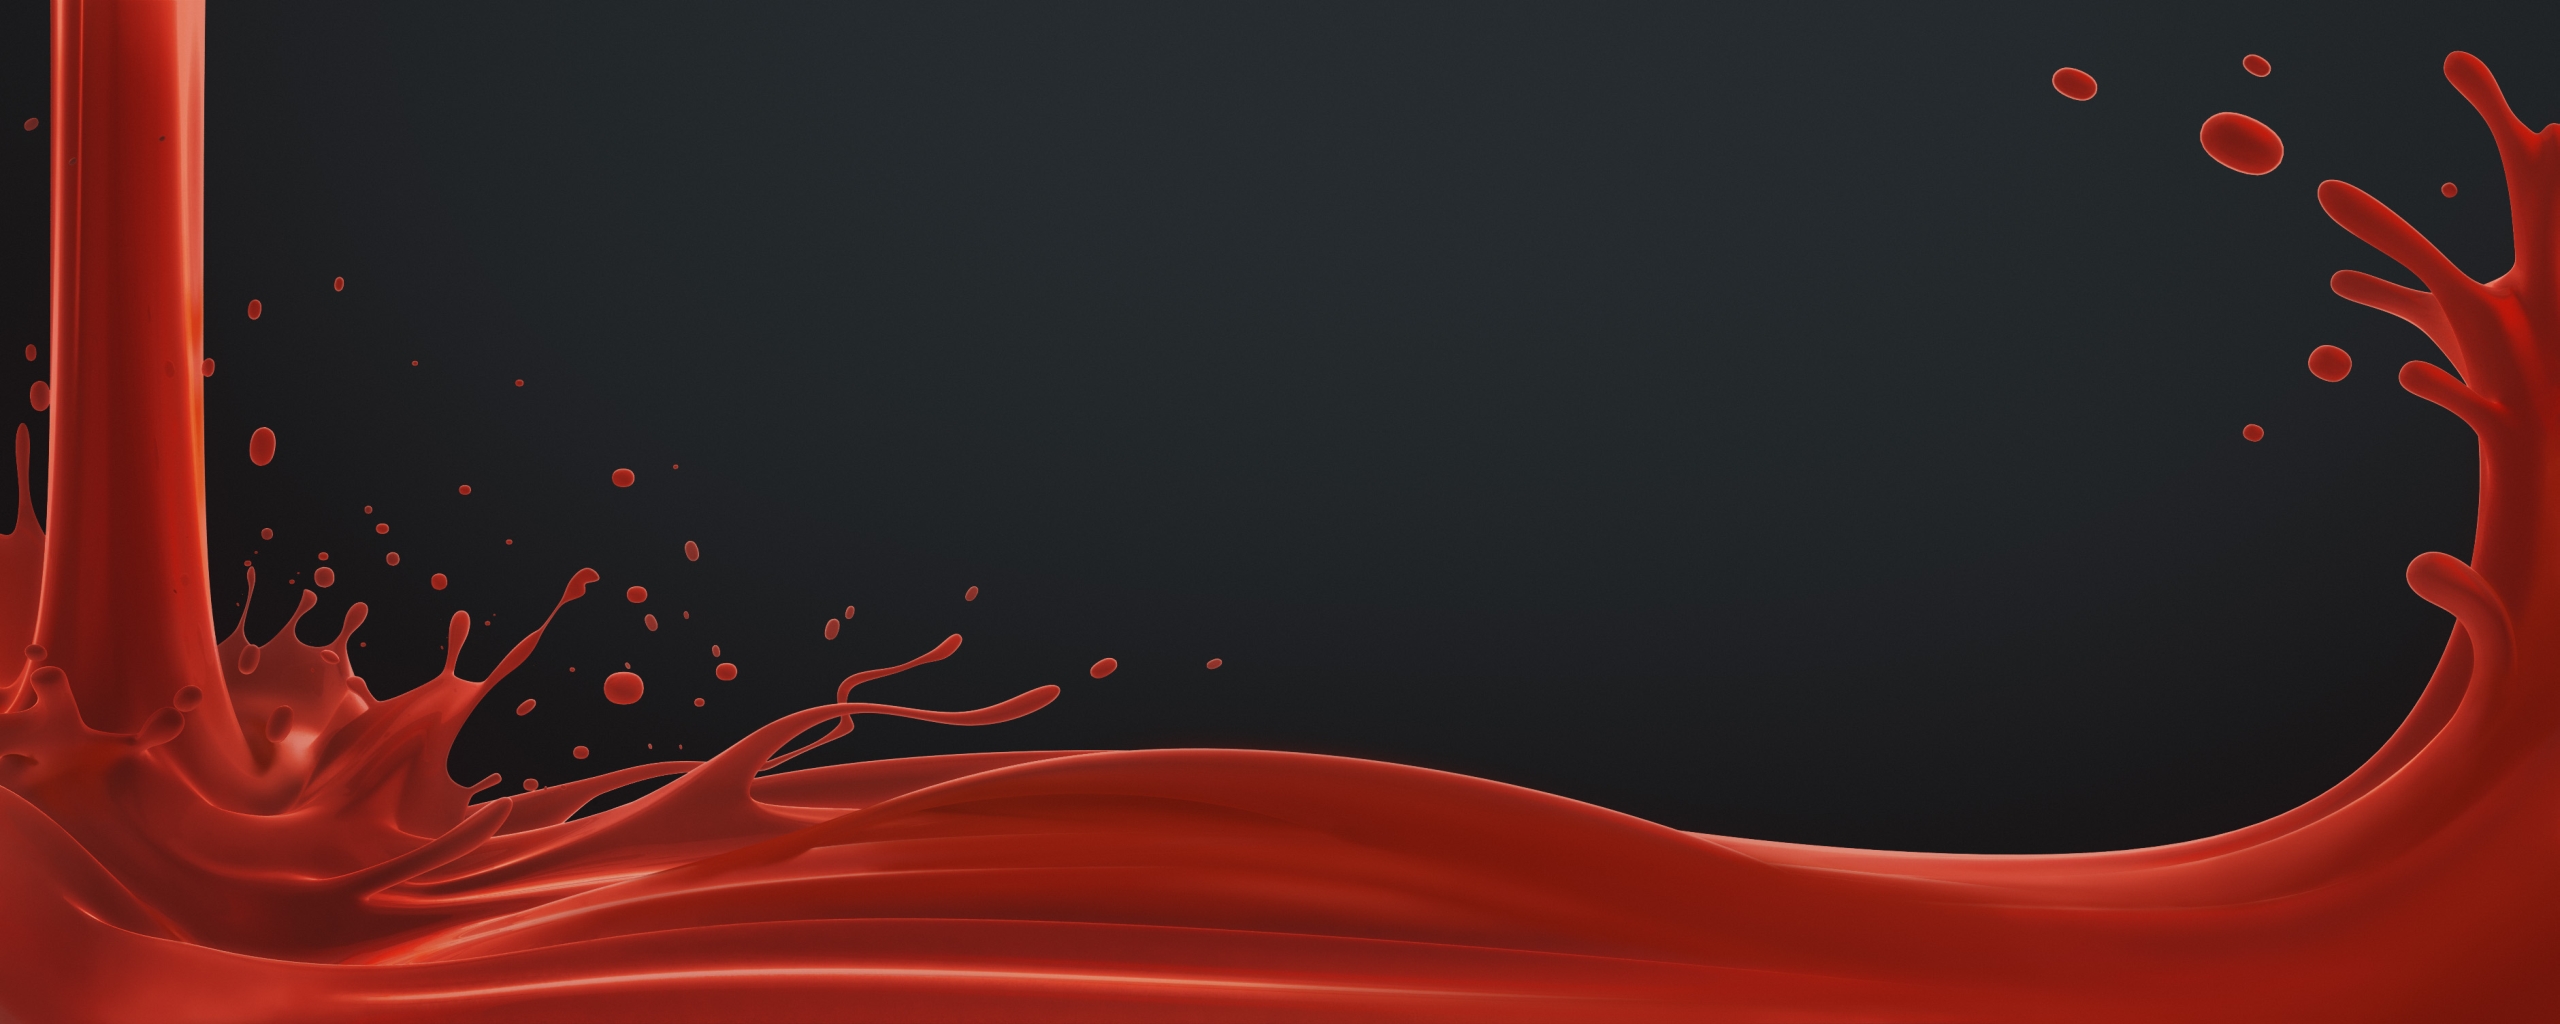 Red Dual Monitor Background - HD Wallpaper 